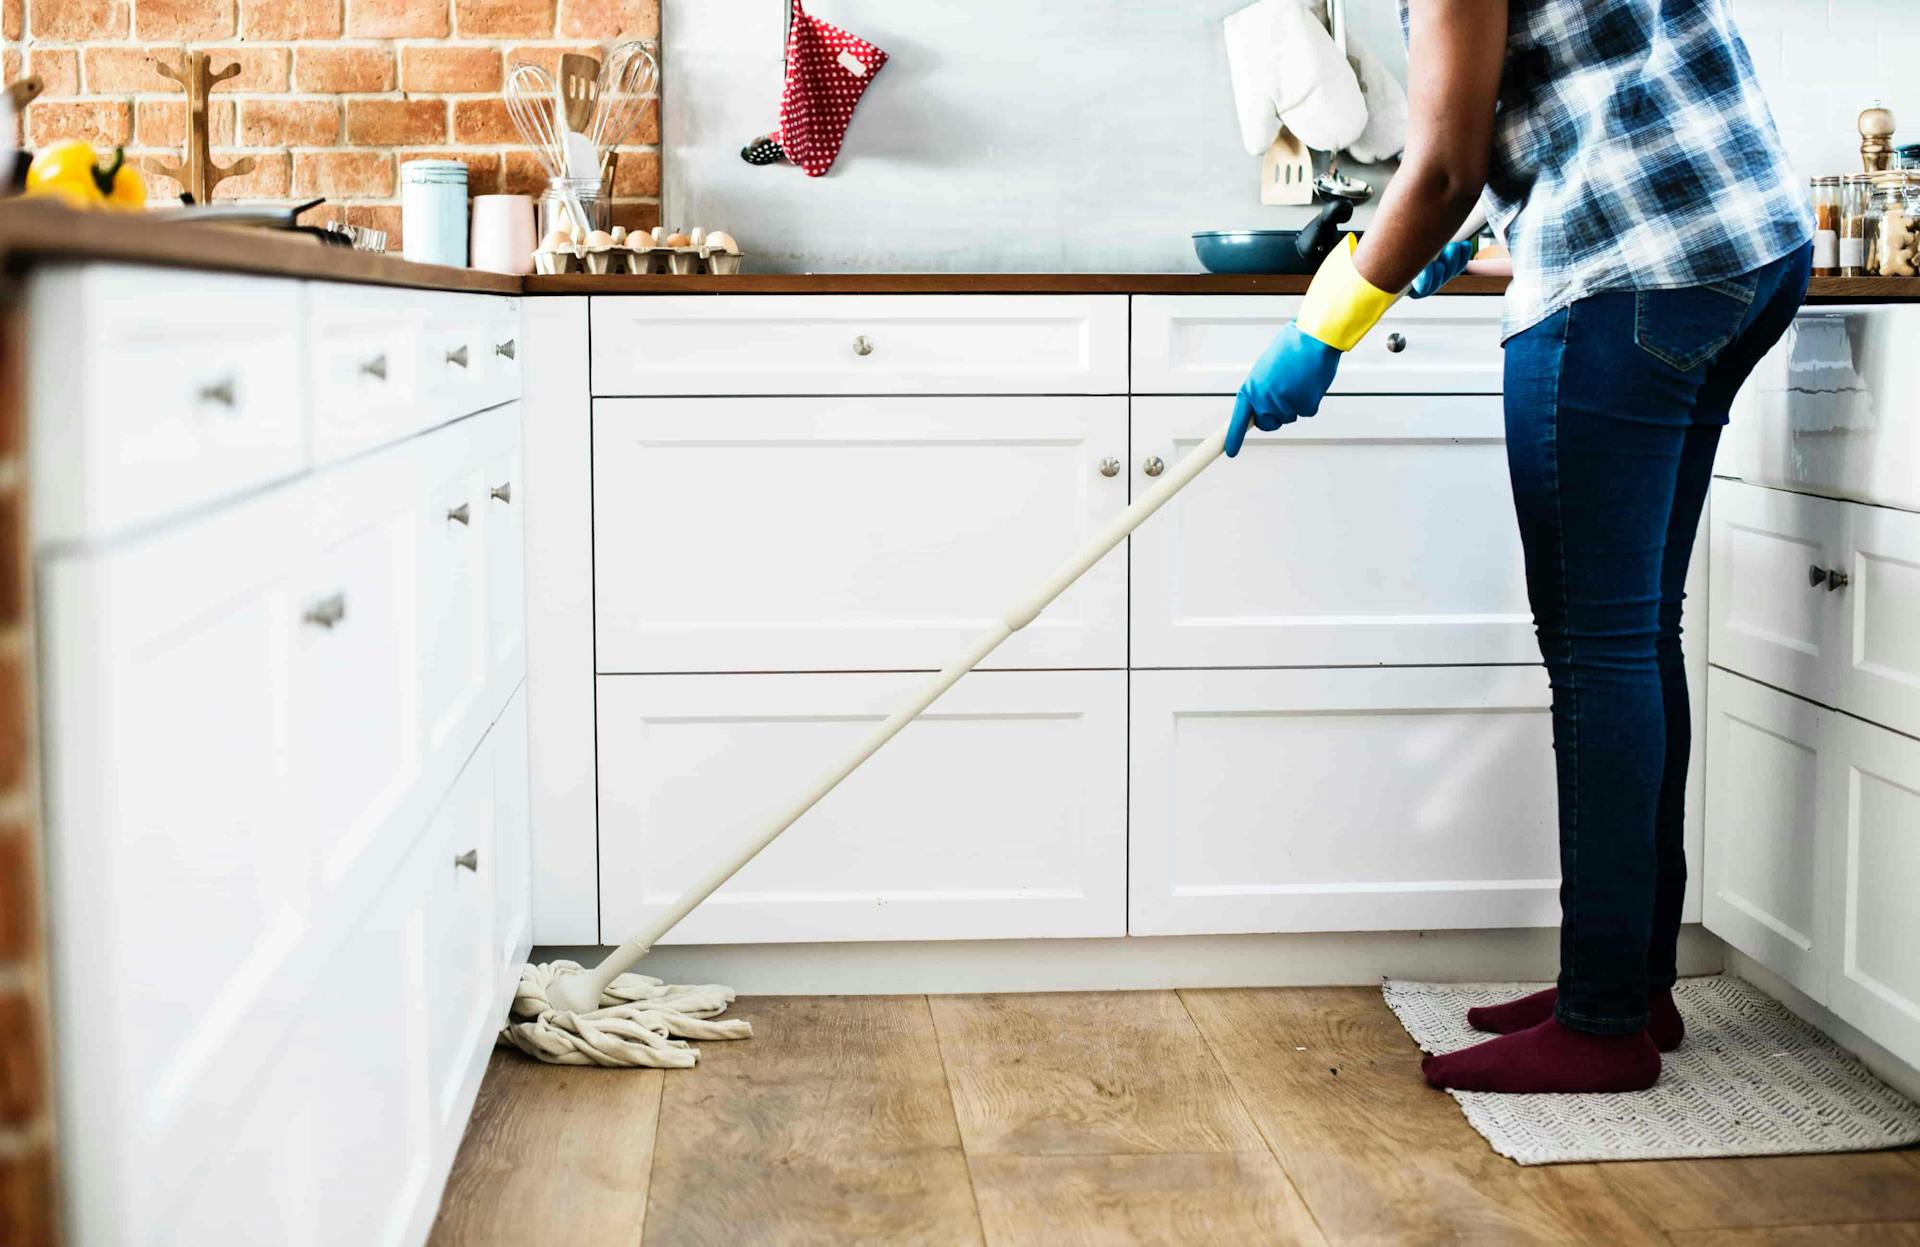 Brits Spend Over 7 Hours Tidying Each Week, New Research Reveals